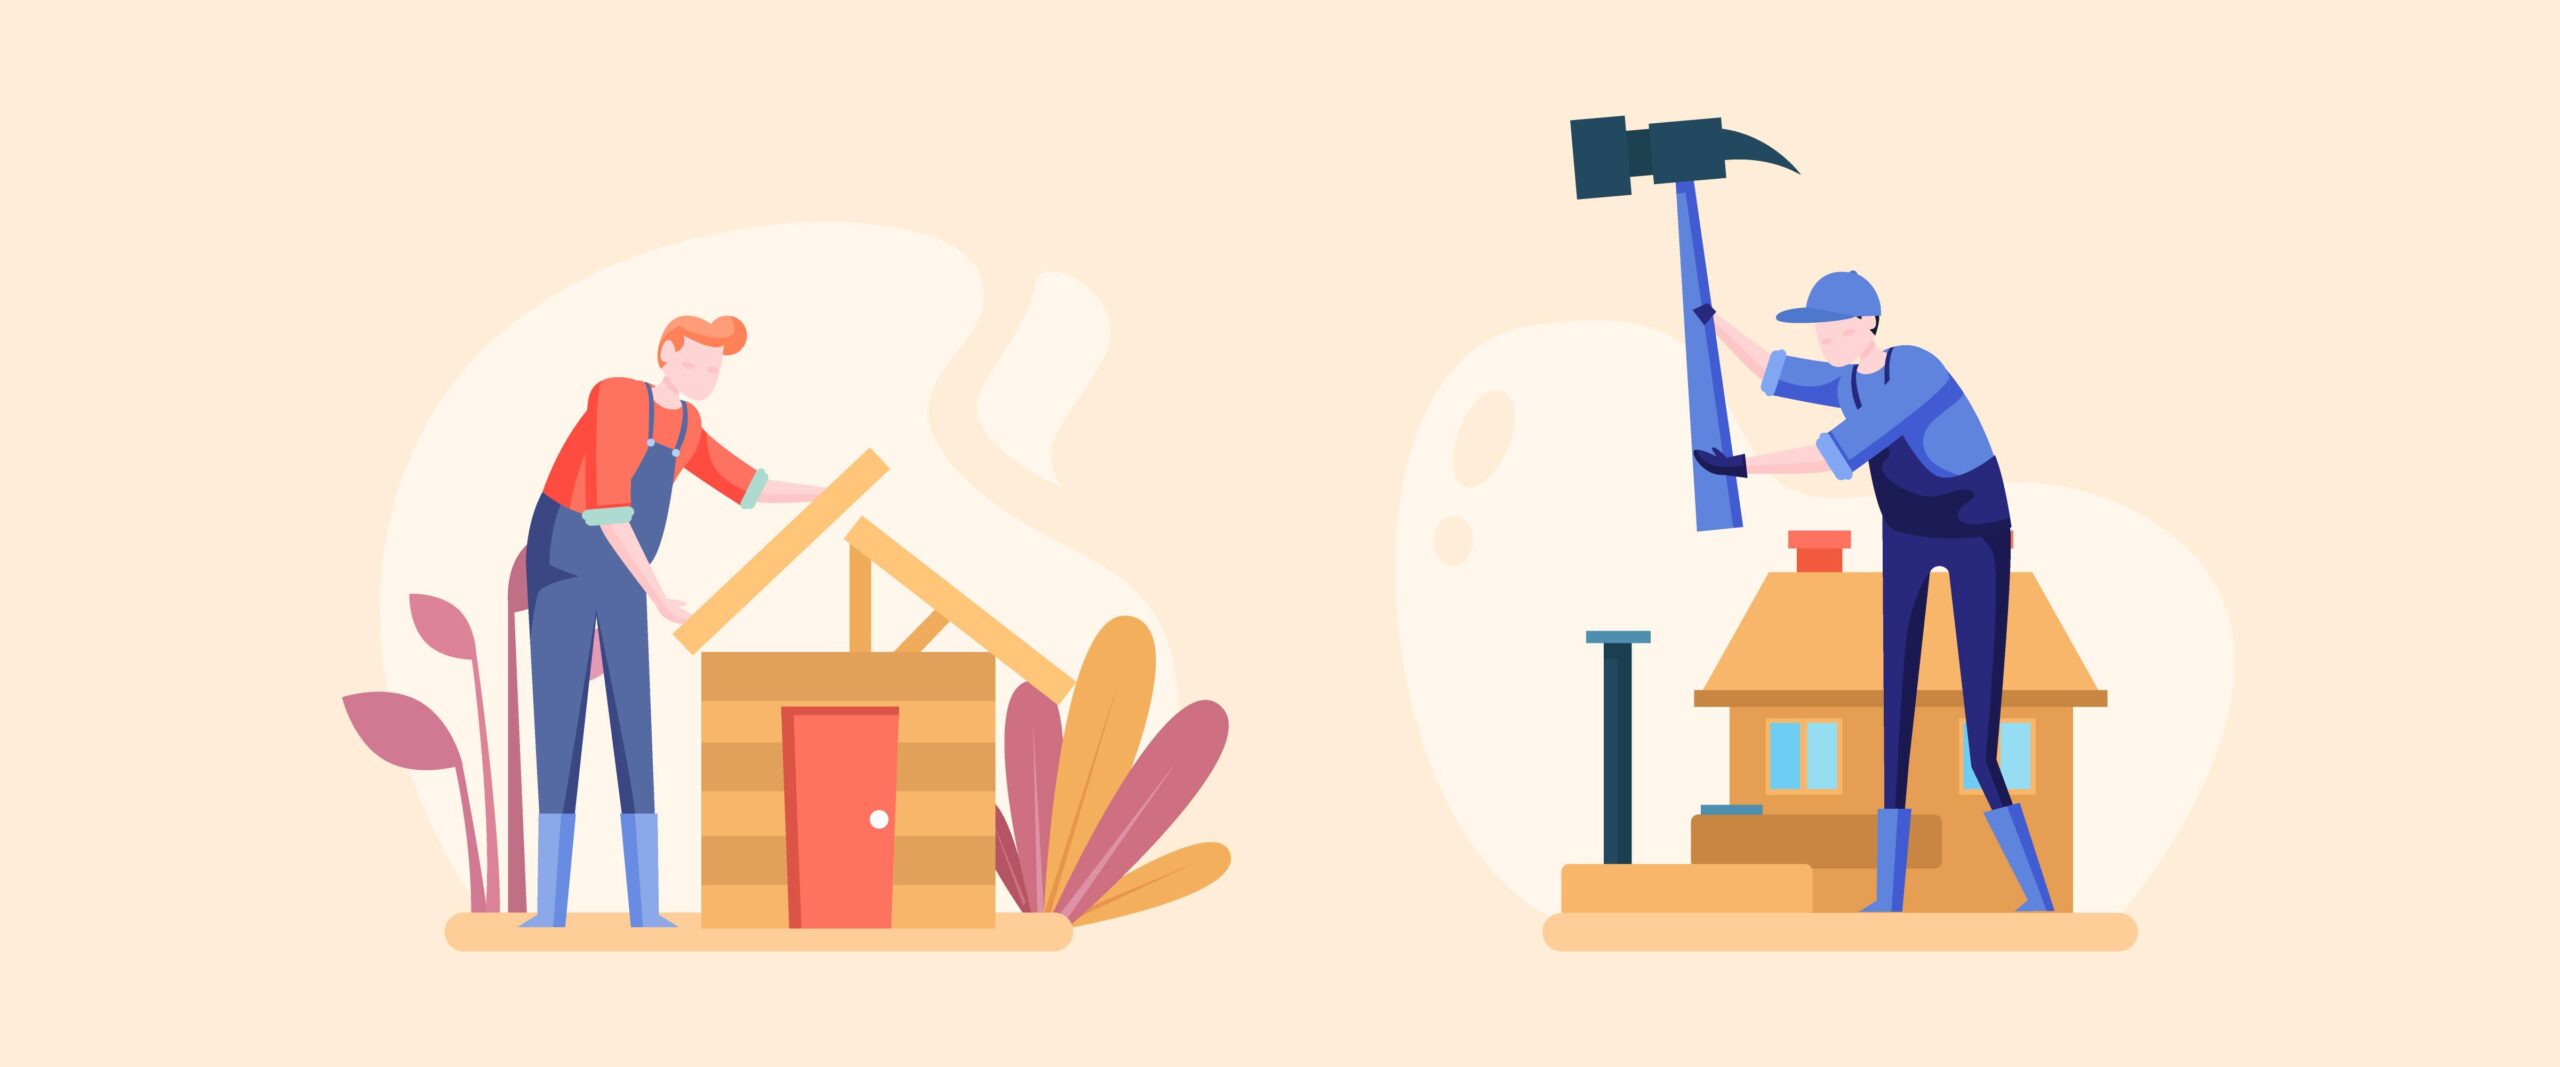 A free vector illustration depicting various household and renovation professions. The illustration showcases a range of skilled workers such as carpenters, plumbers, electricians, painters, and other professionals involved in home improvement and renovation projects - transaction profiling.